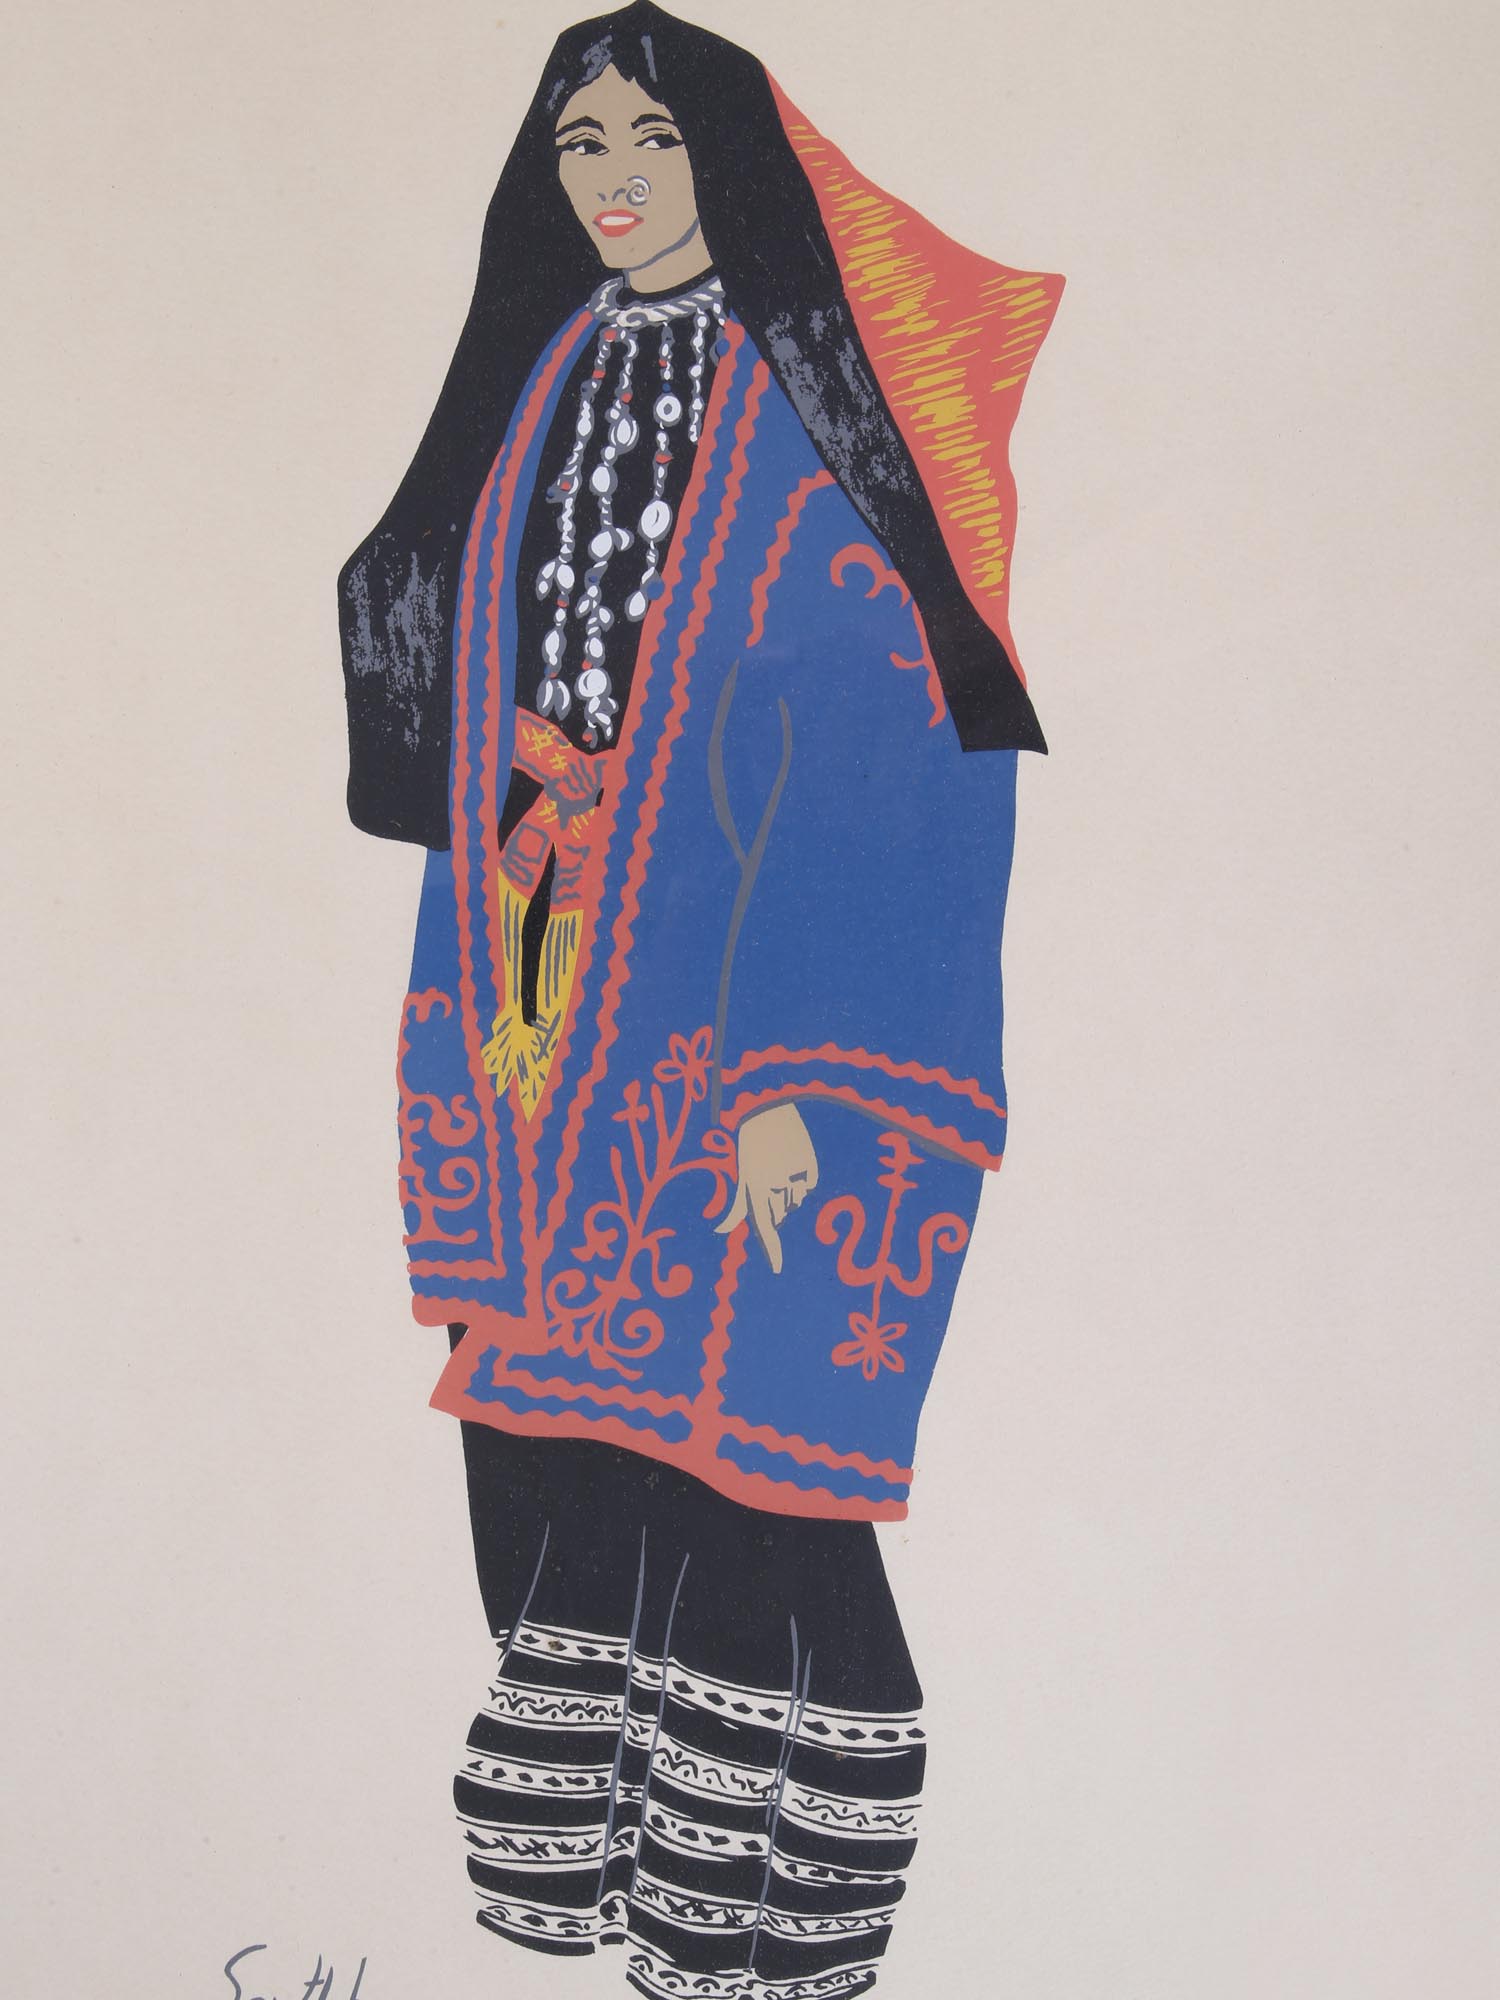 GAILEE BEDOUIN FASHION COSTUME PRINT BY SOUTHBY PIC-1